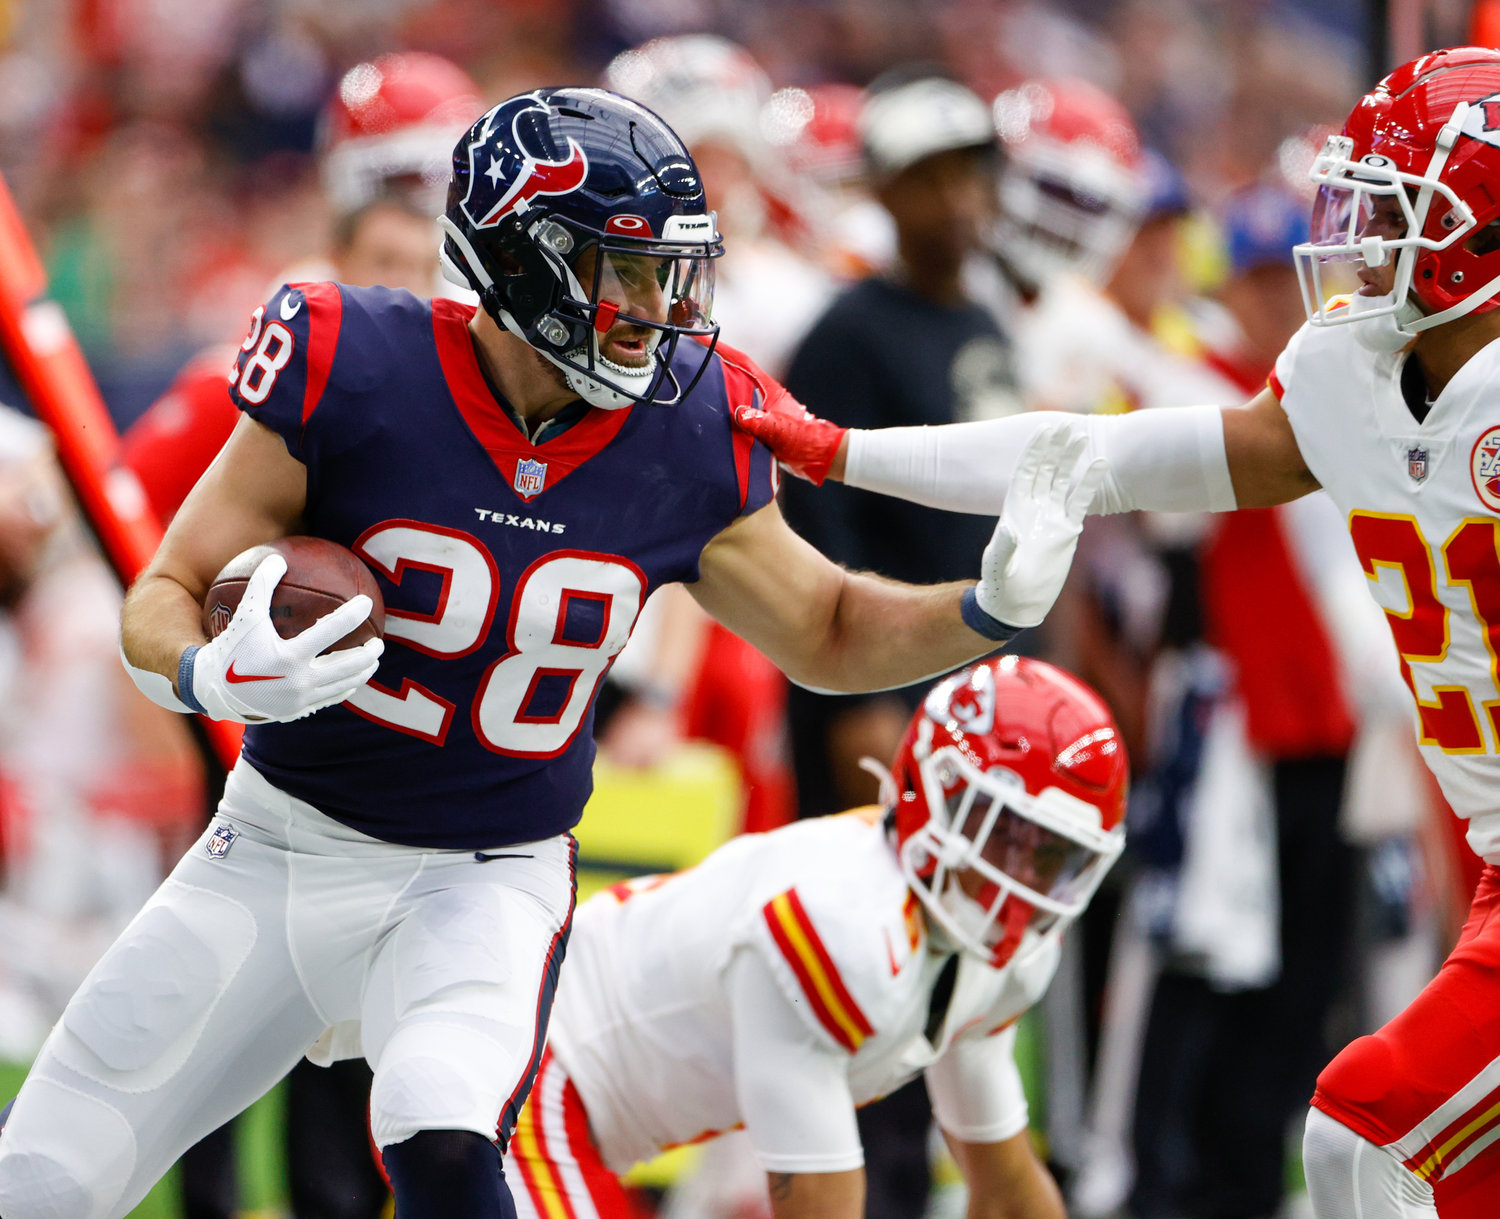 Houston Texans running back Rex Burkhead (28) fends off Kansas City Chiefs cornerback Trent McDuffie (21) on a carry during an NFL game between the Texans and the Chiefs on Dec. 18, 2022, in Houston. The Chiefs won, 30-24, in overtime.